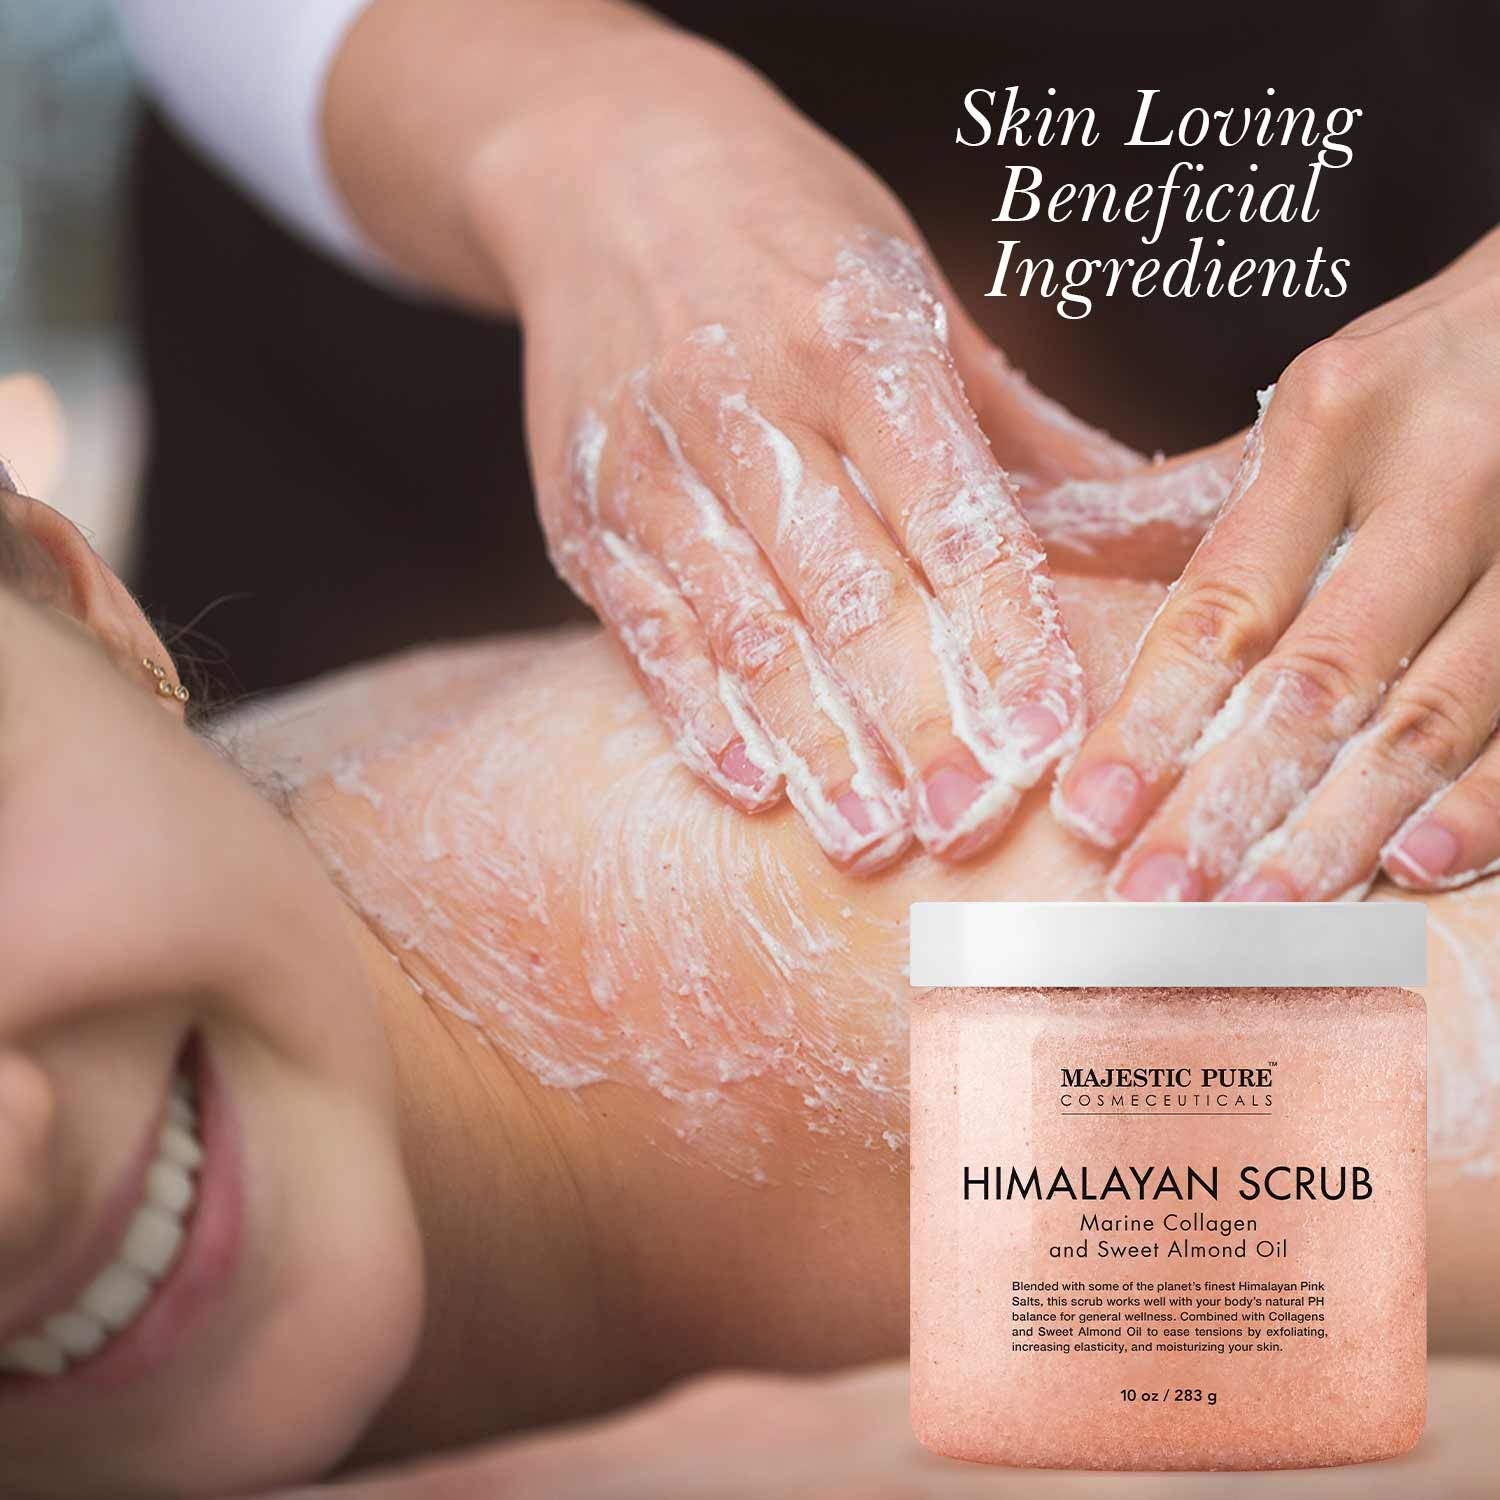 Pure Himalayan Salt Body Scrub with Collagen and Sweet Almond Oil